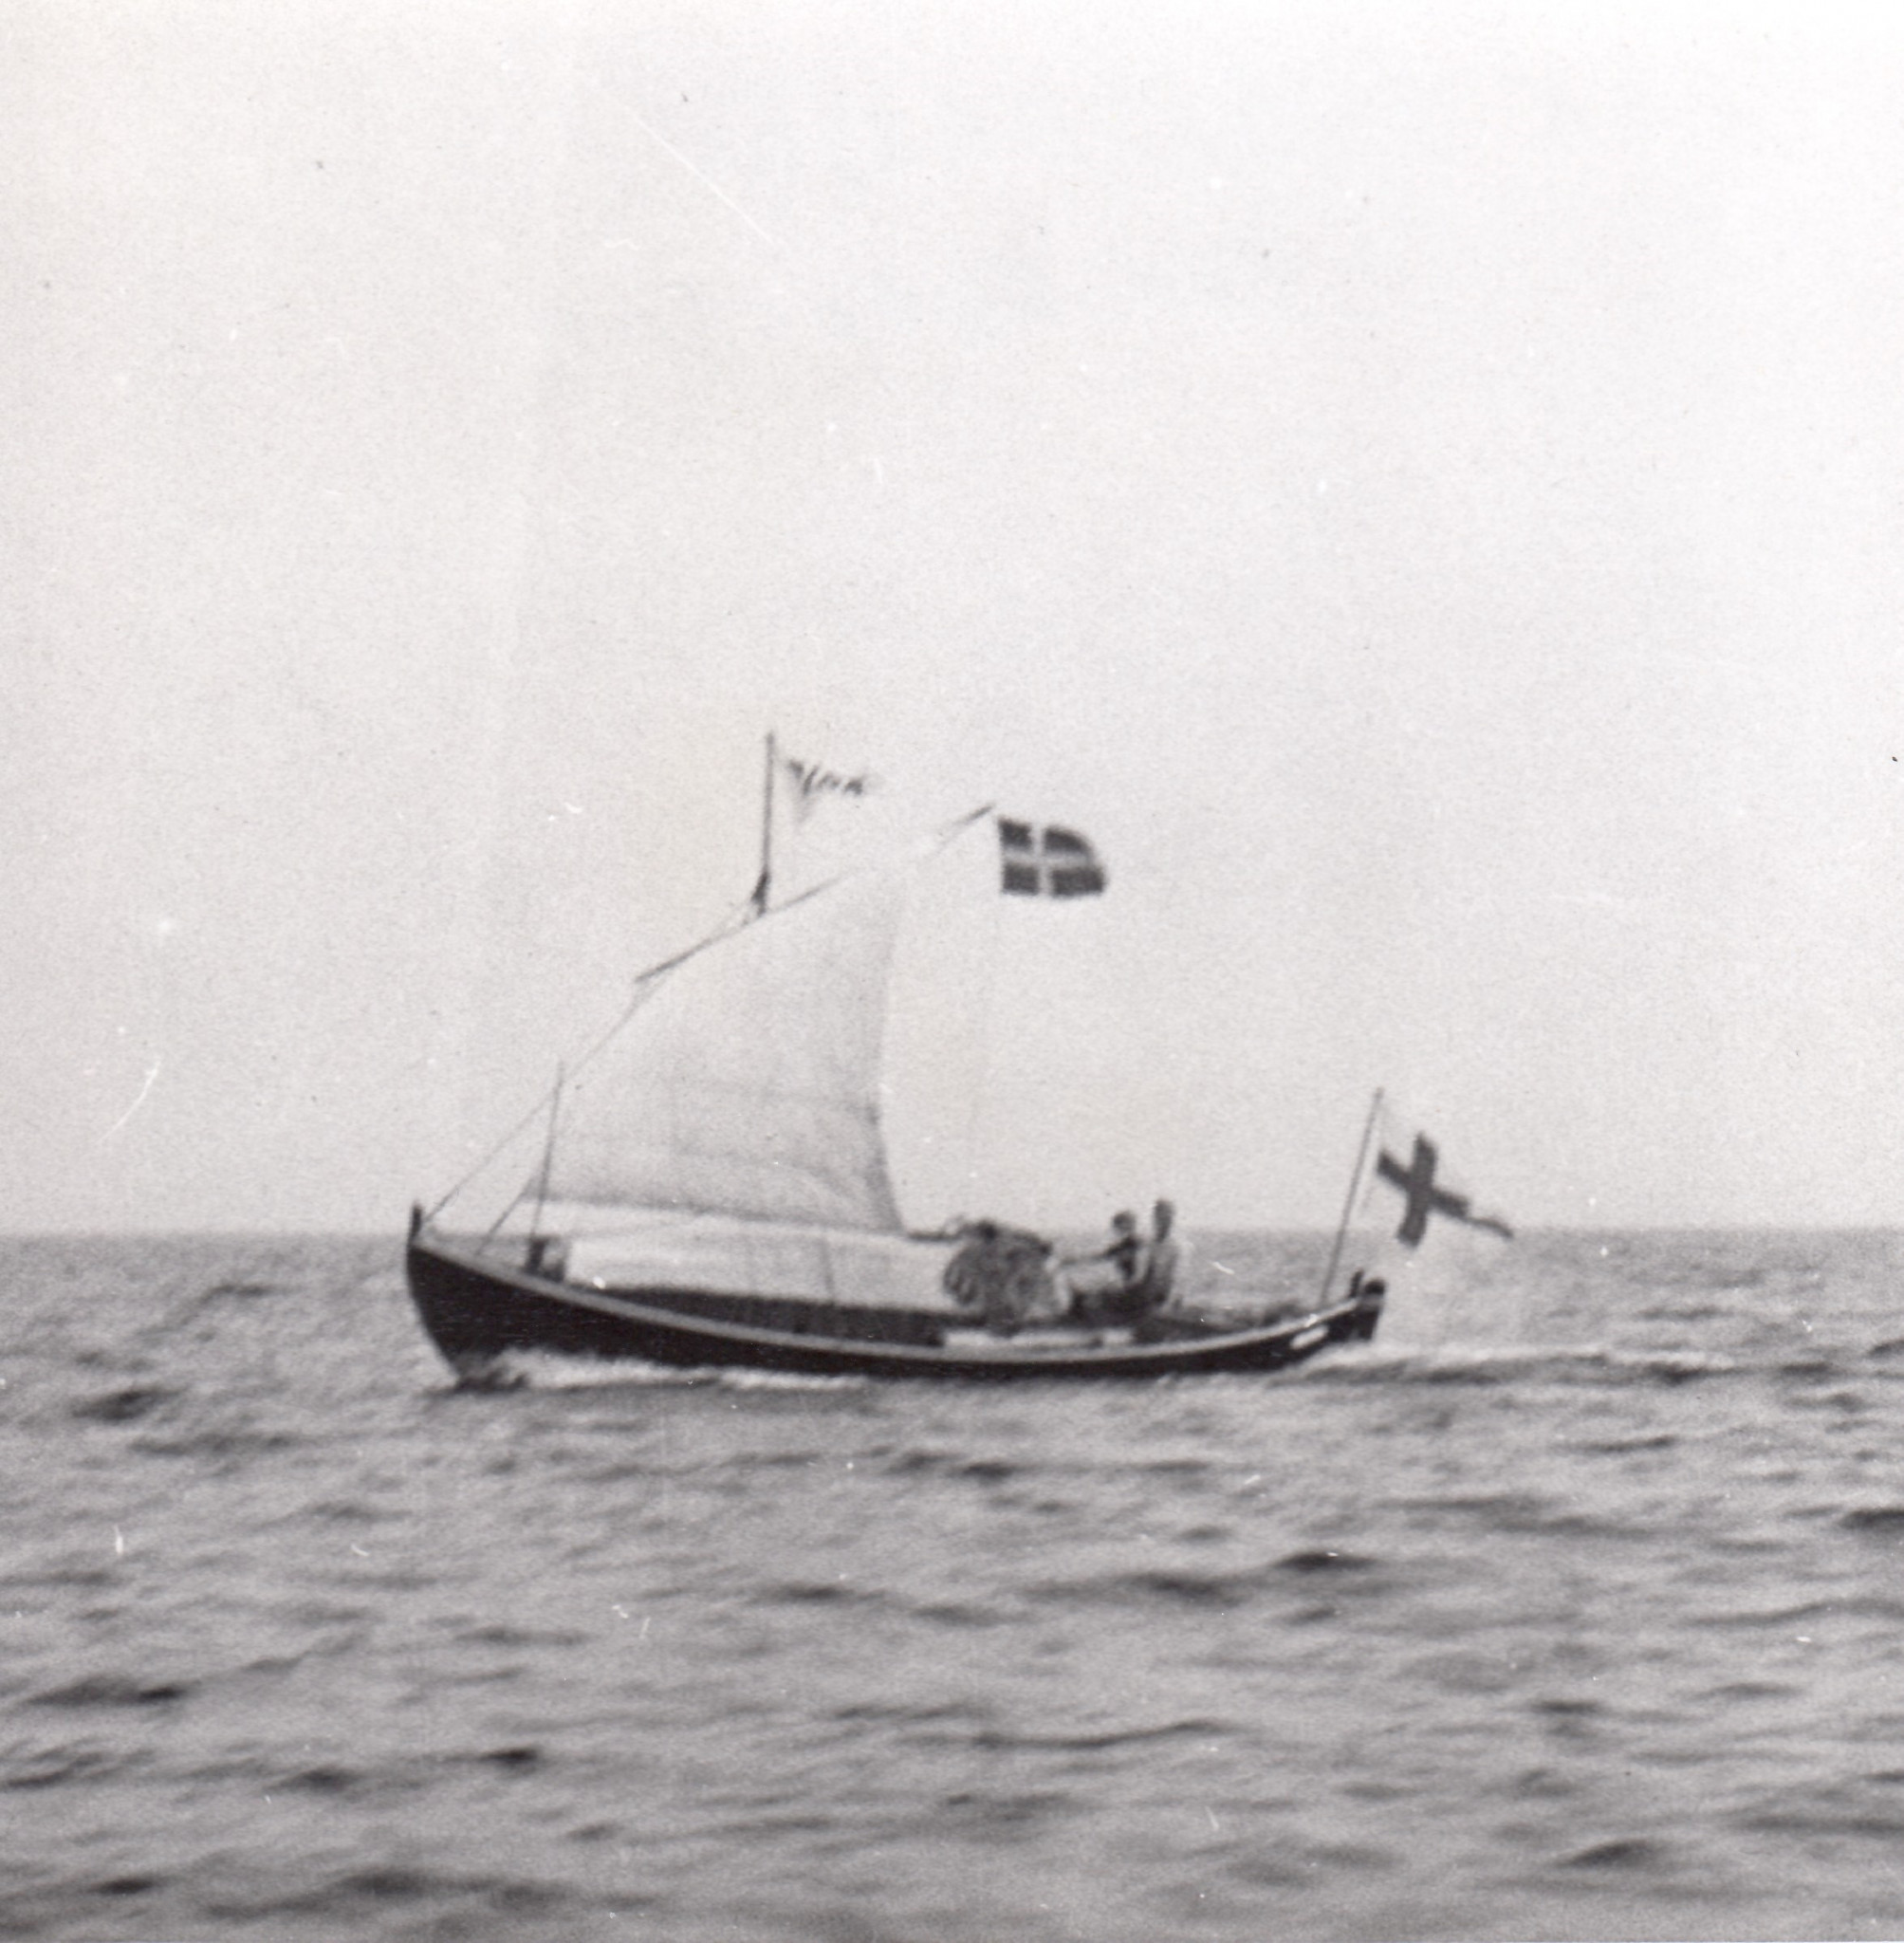 Story of sailing expedition to raise Faroe Islands flag at 1952 Olympic Games revealed